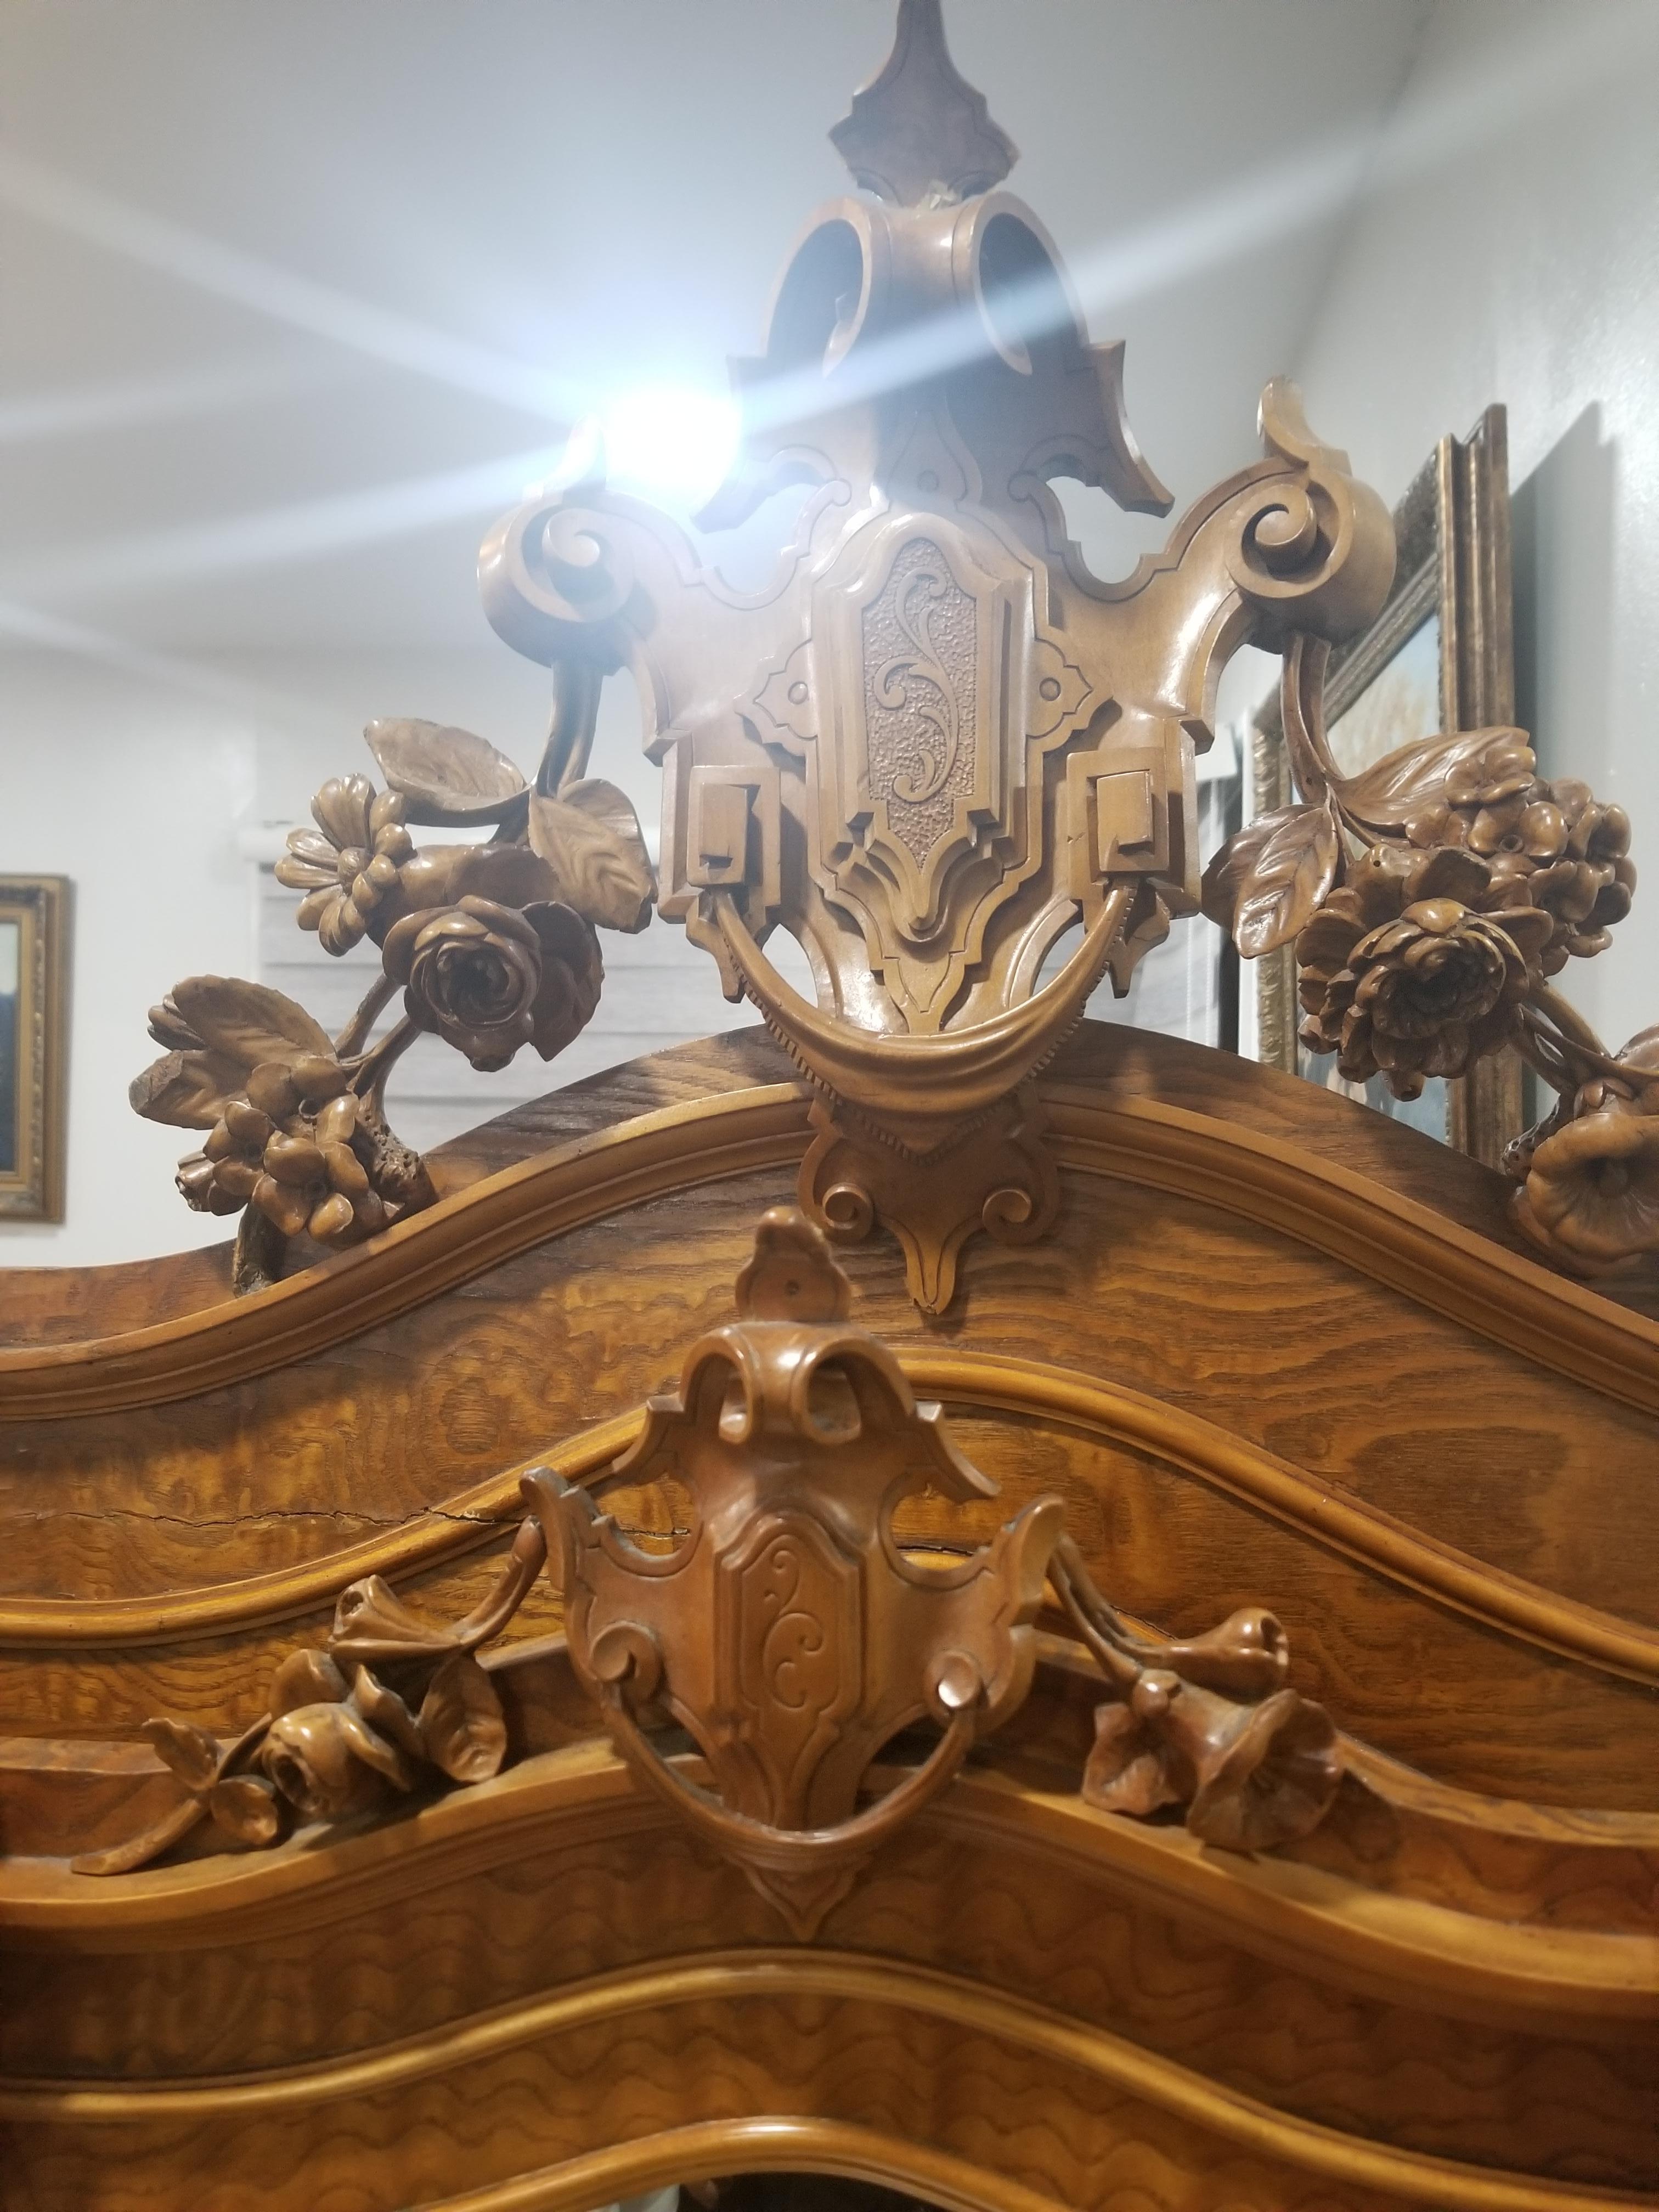 Stately est. 1885 Antique Louis XIV bedroom set, with intricate woodwork, marble/stonework and engravings. Fully functional and an incredible value. Set consist of many pieces. Dimensions are for Headboard and Bed, other dimensions are listed